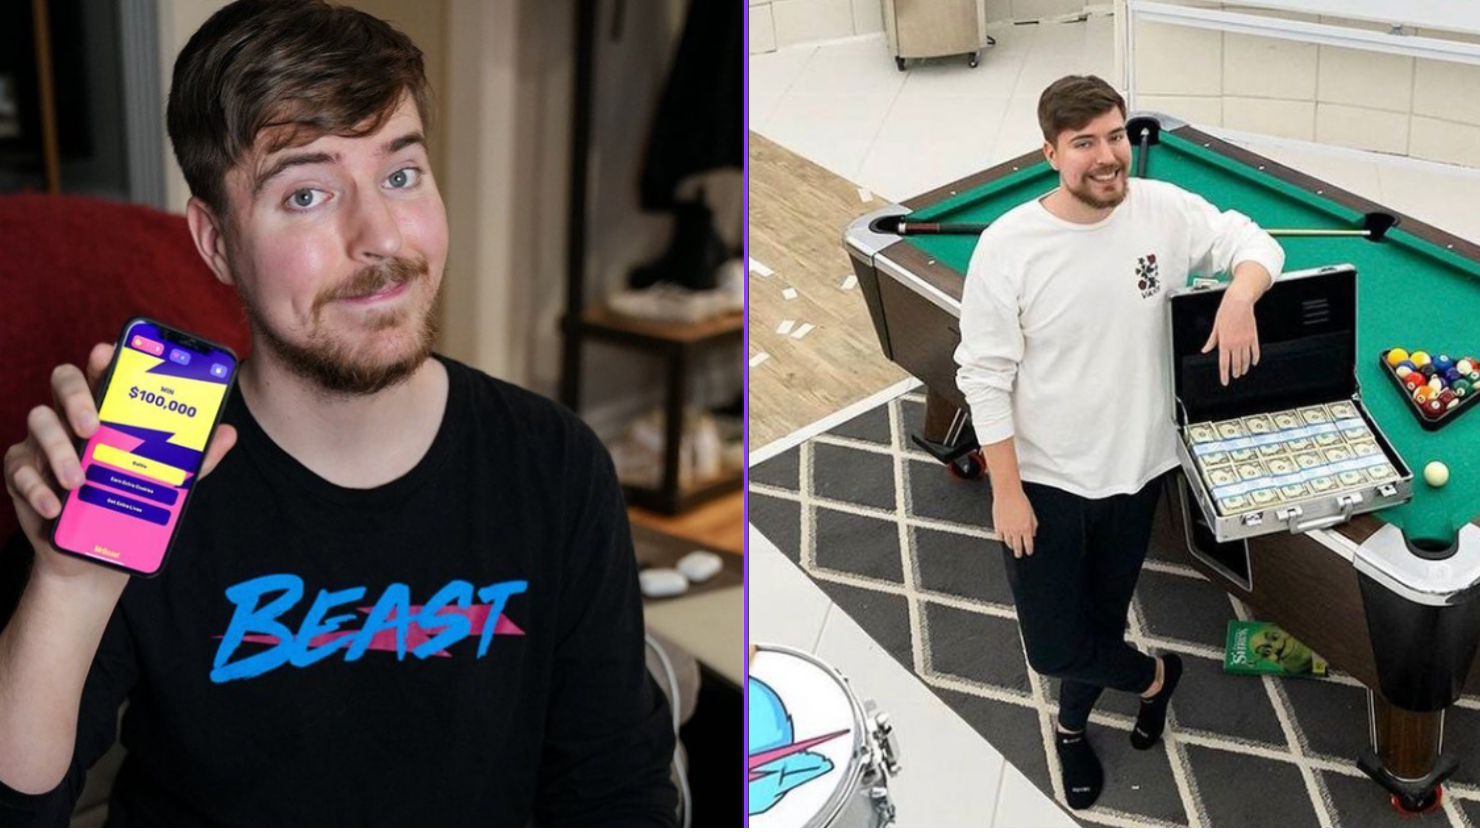 JUST THINKING ABOUT PEOPLE HATING MRBEAST FOR BEING A GOOD HUMAN